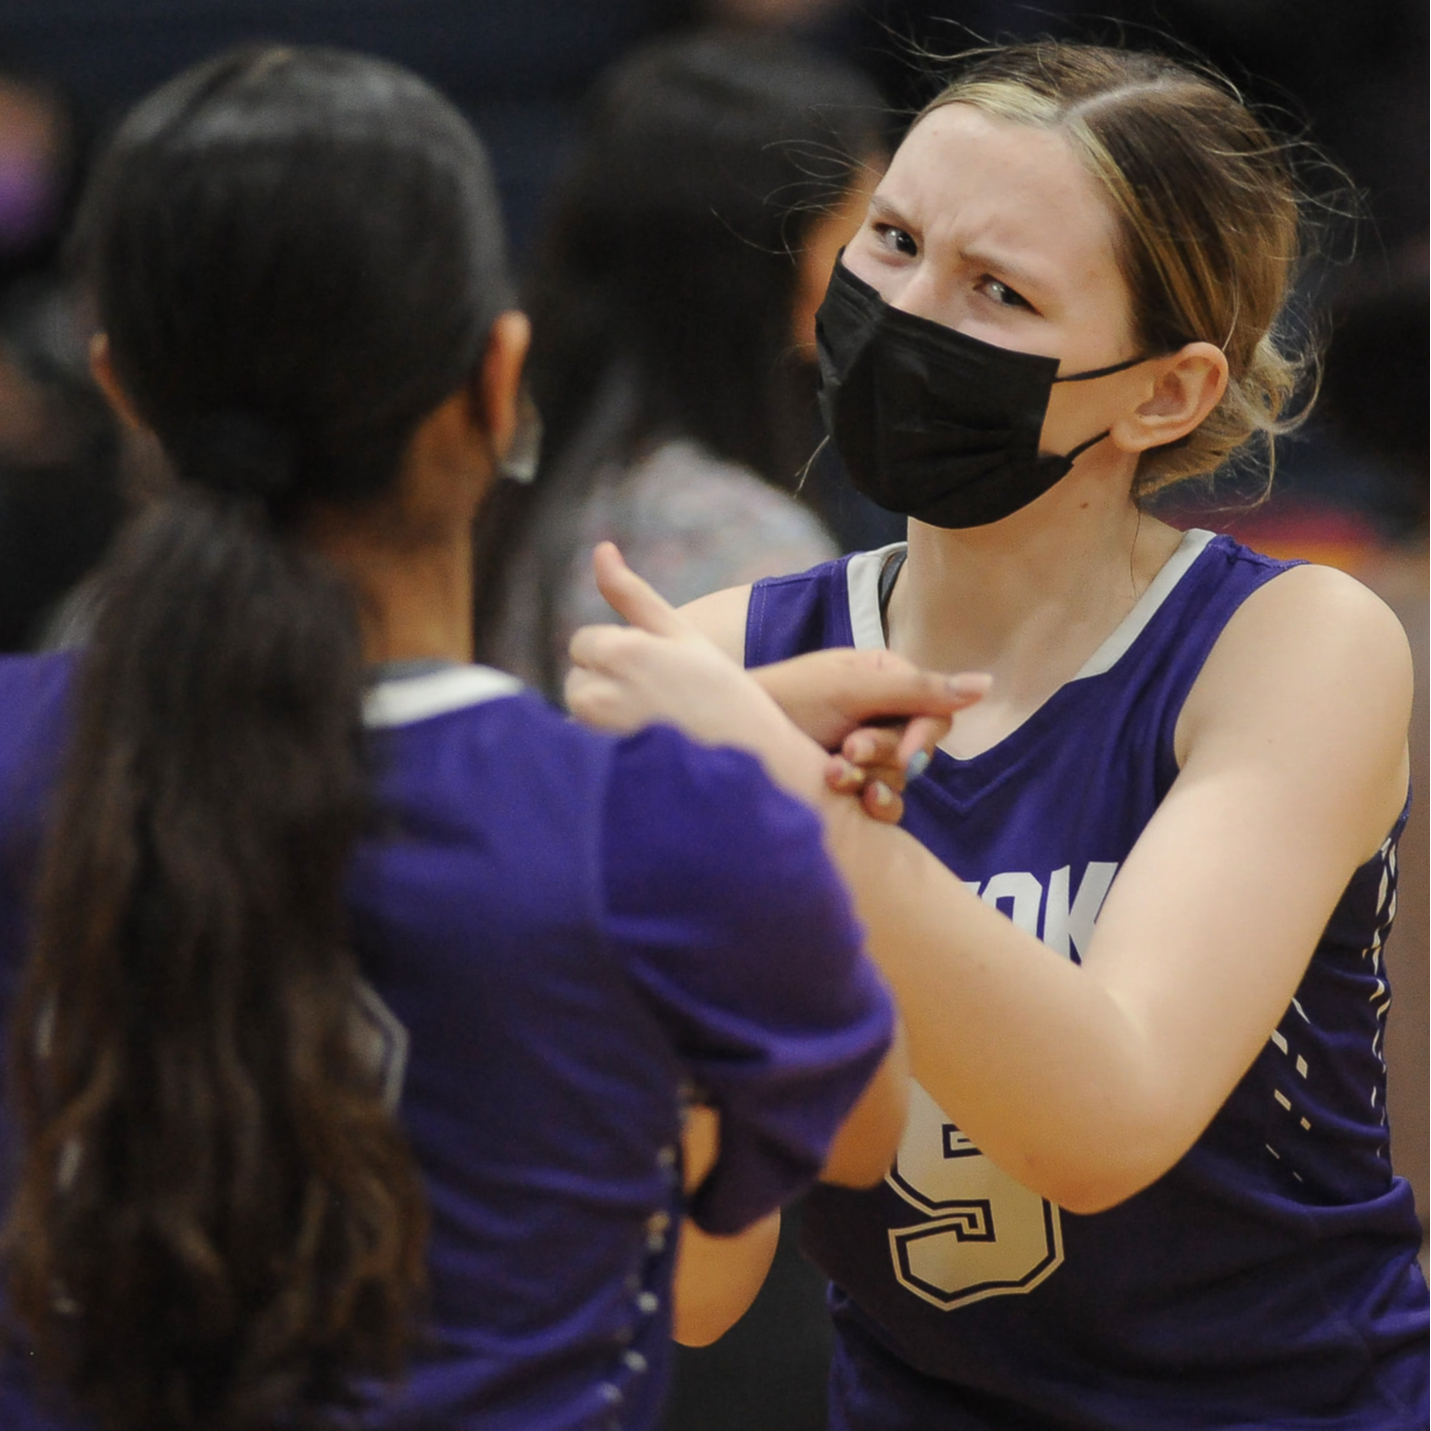 Two student athletes at a game facing each other wearing their purple knight jerseys.